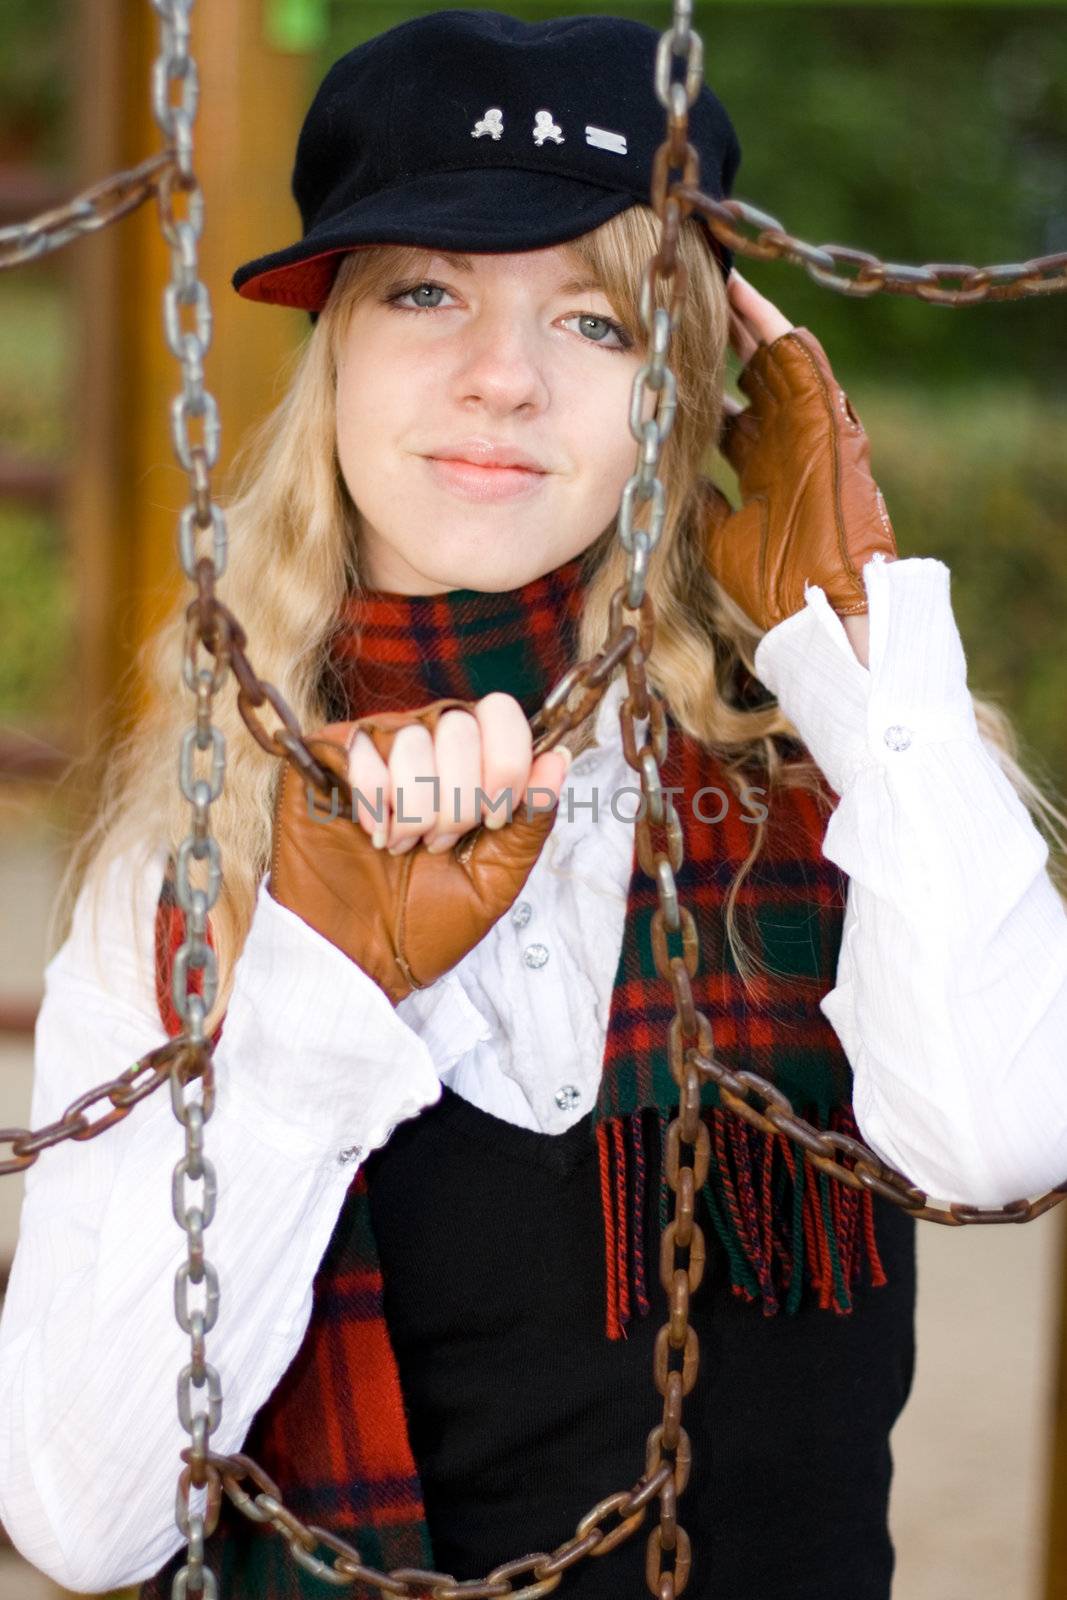 Young girl behind the chains on a playground